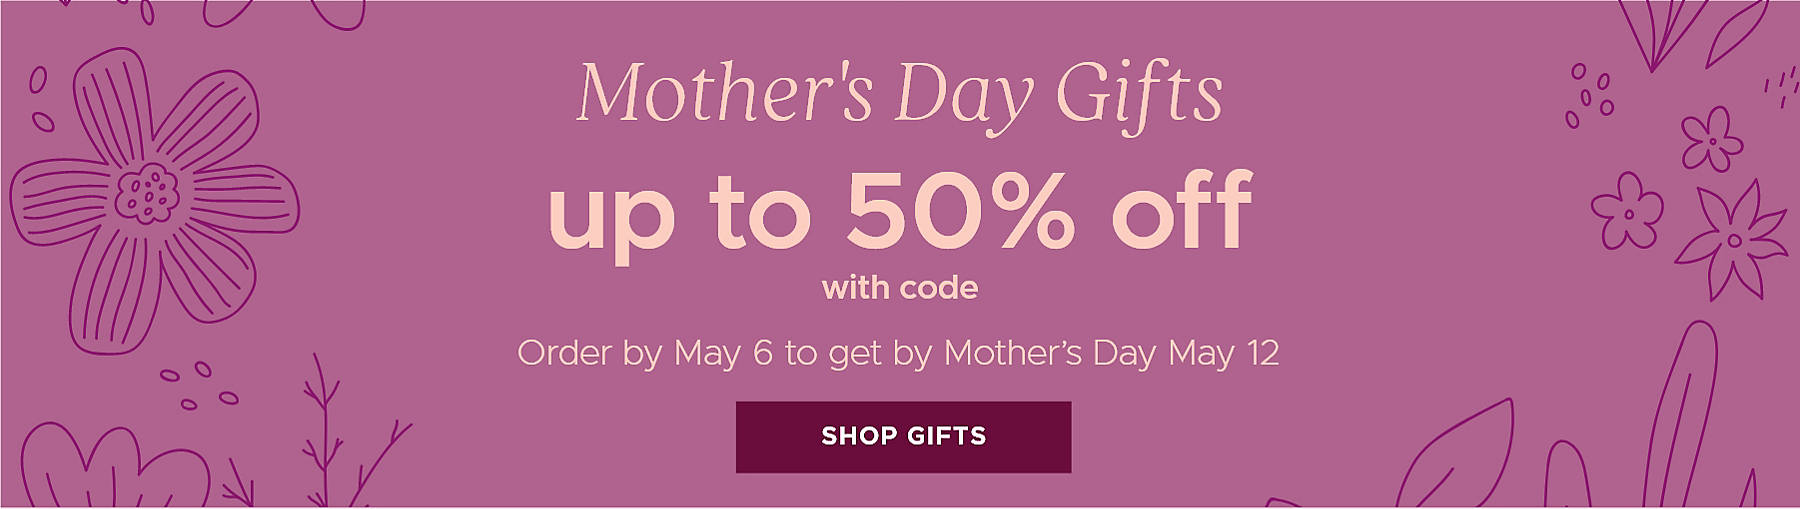 Mother's Day Gifts up to 50% off with code Order by May 2 to get by Mother's Day May 12 Shop Gifts